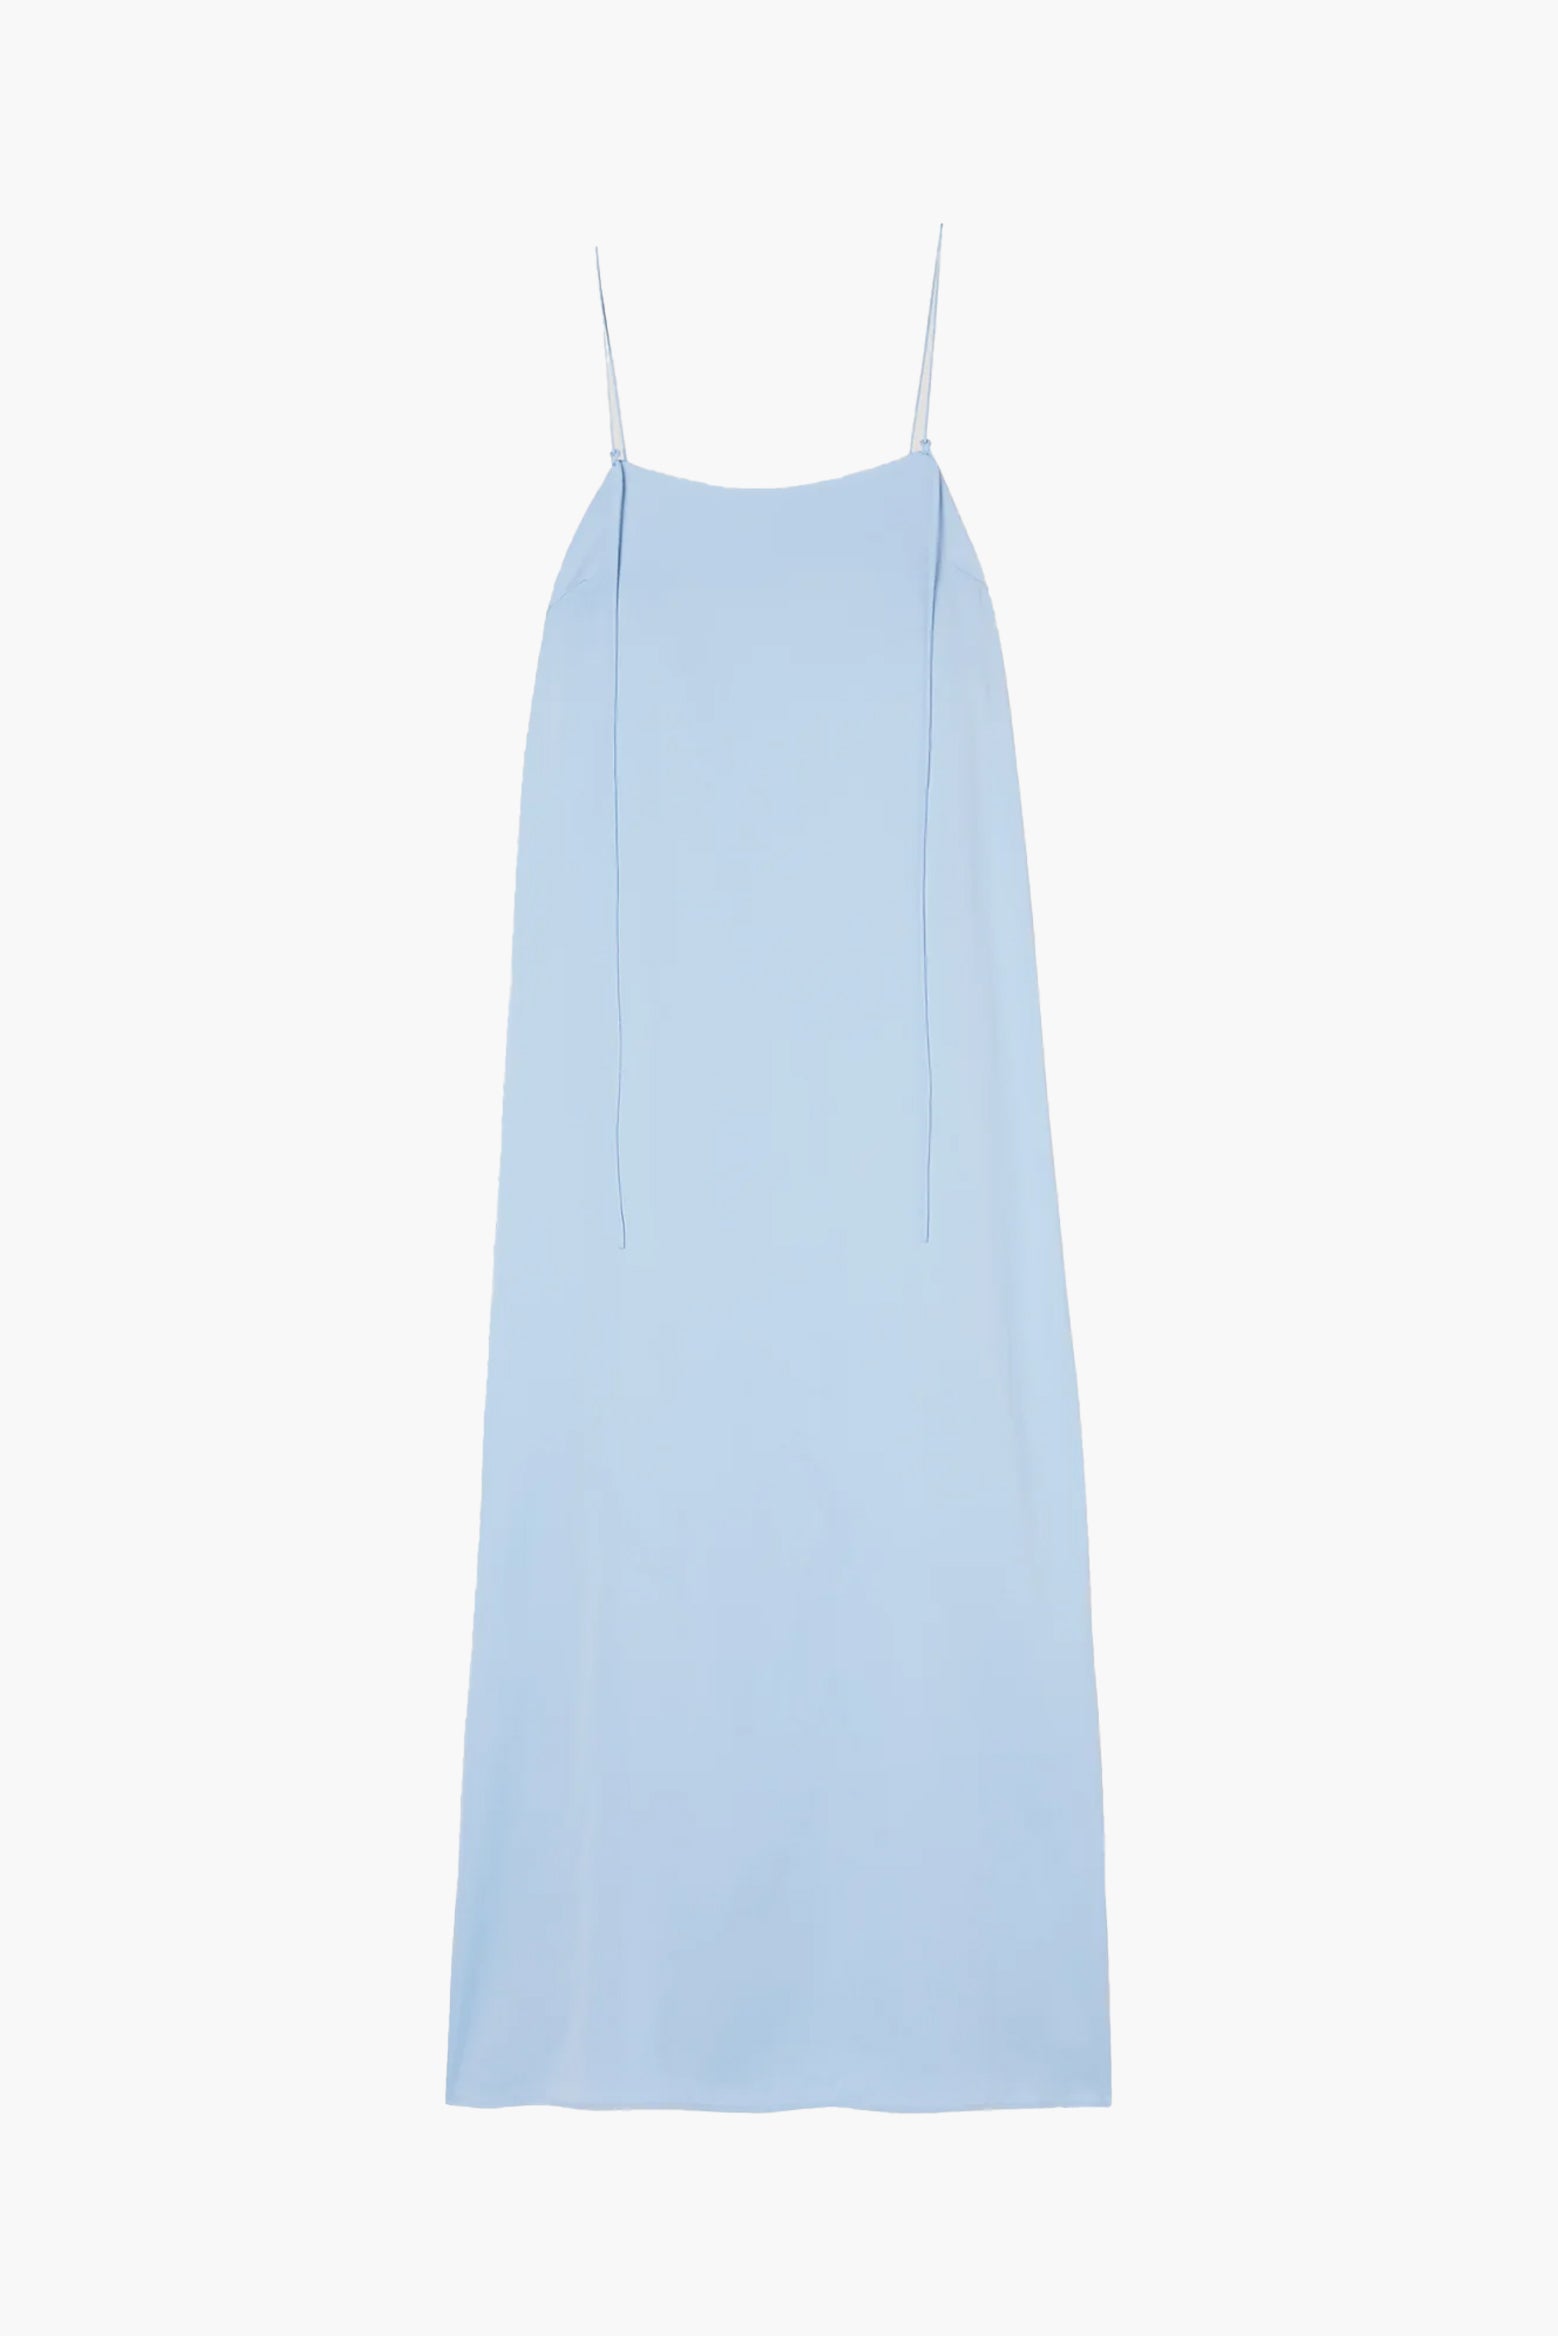 The Rohe Satin Slip Dress in Sky available at The New Trend Australia